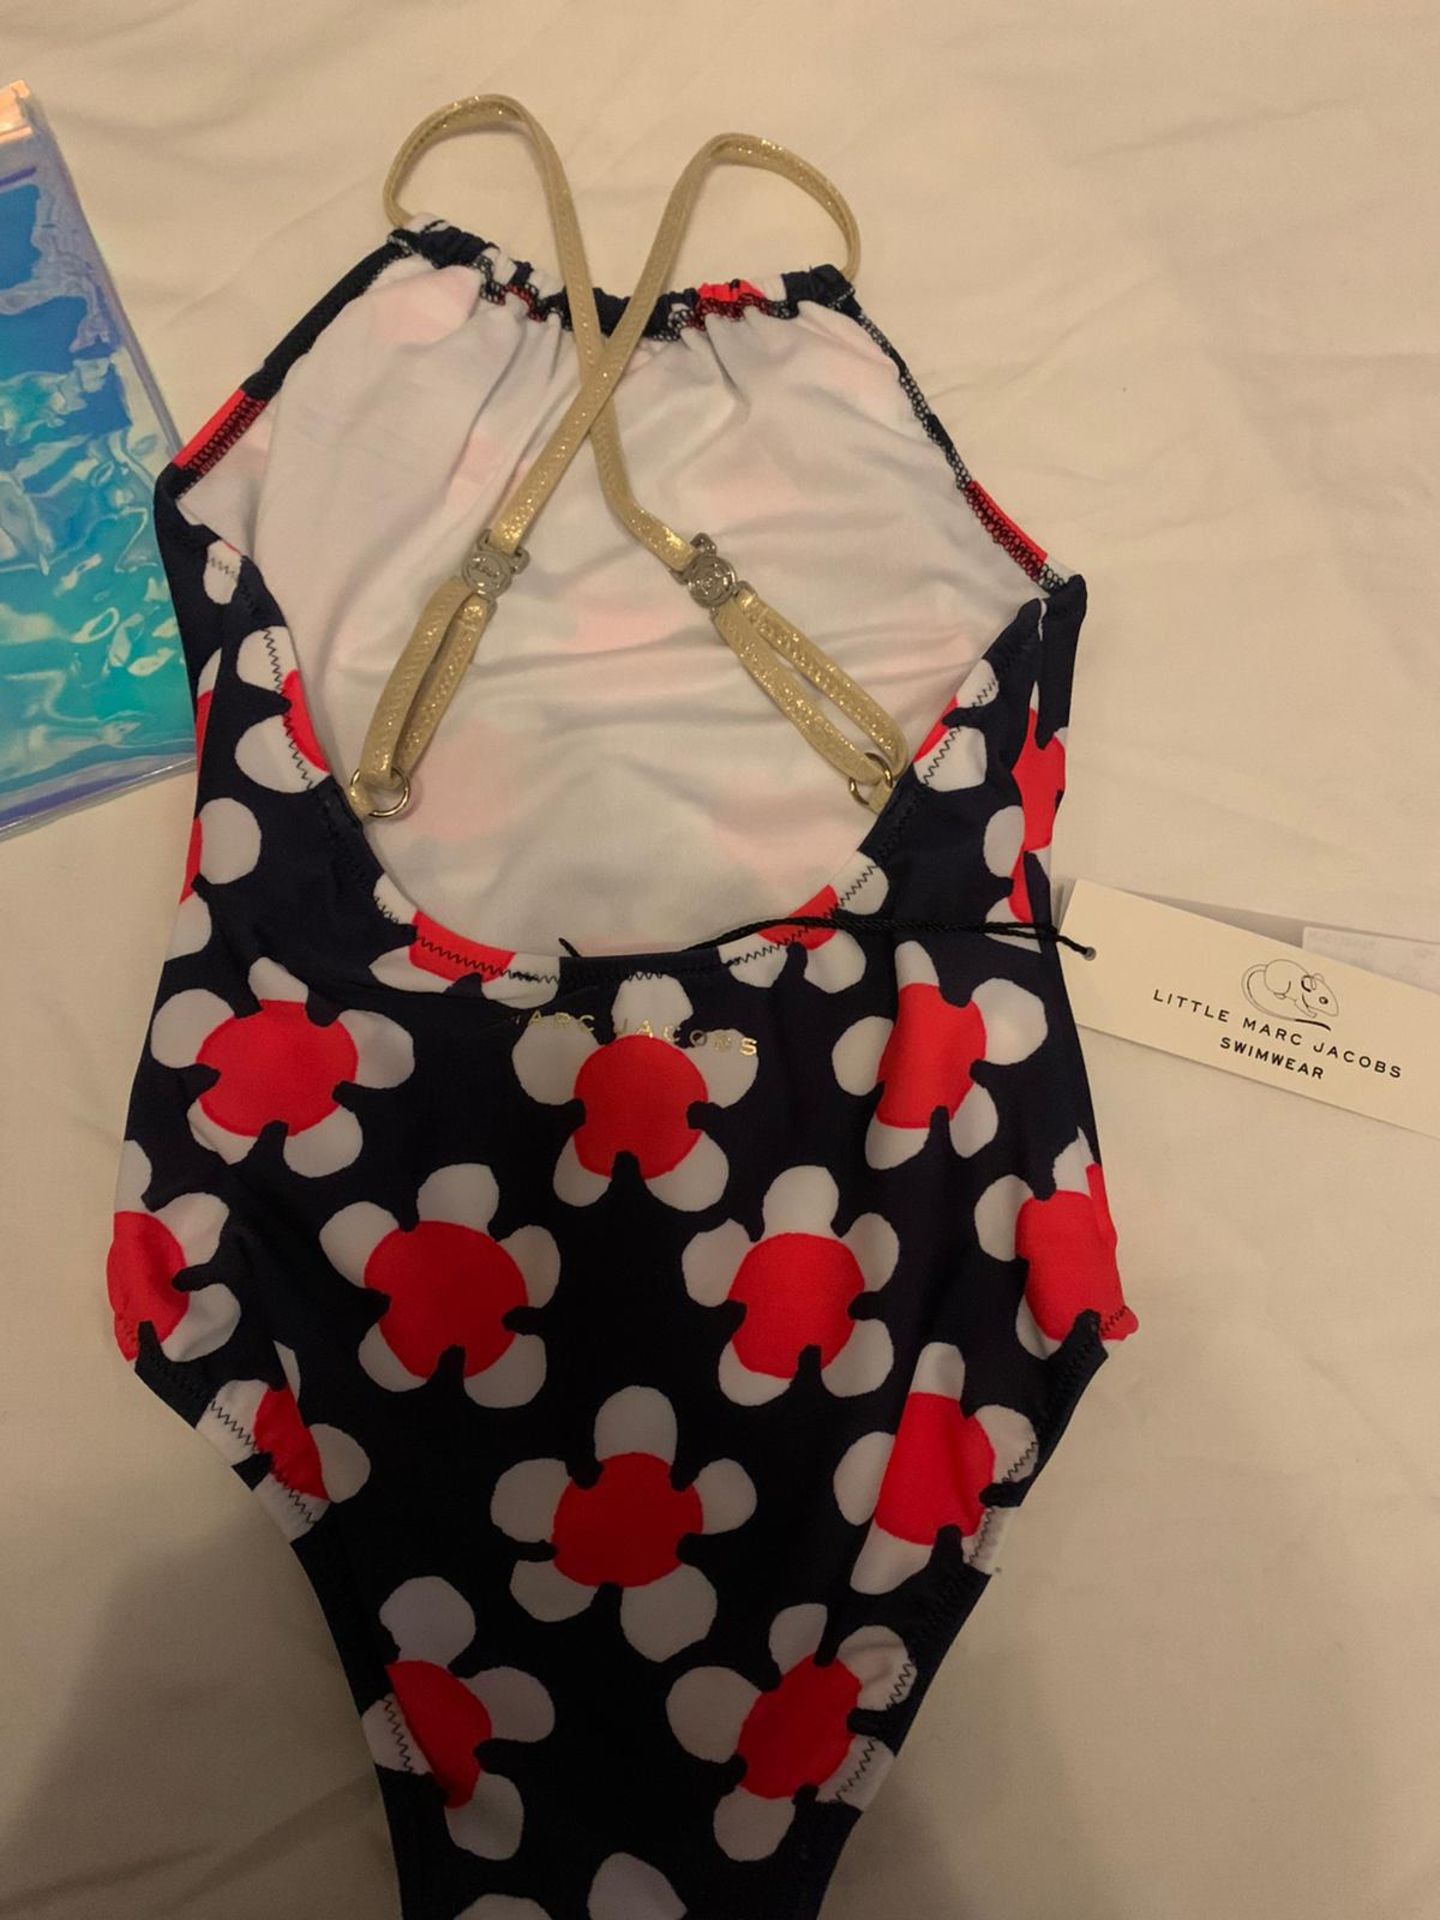 LITTLE MARC JACOBS FLORAL SWIMSUIT WITH WET BAG - AGE 6 - Image 3 of 4